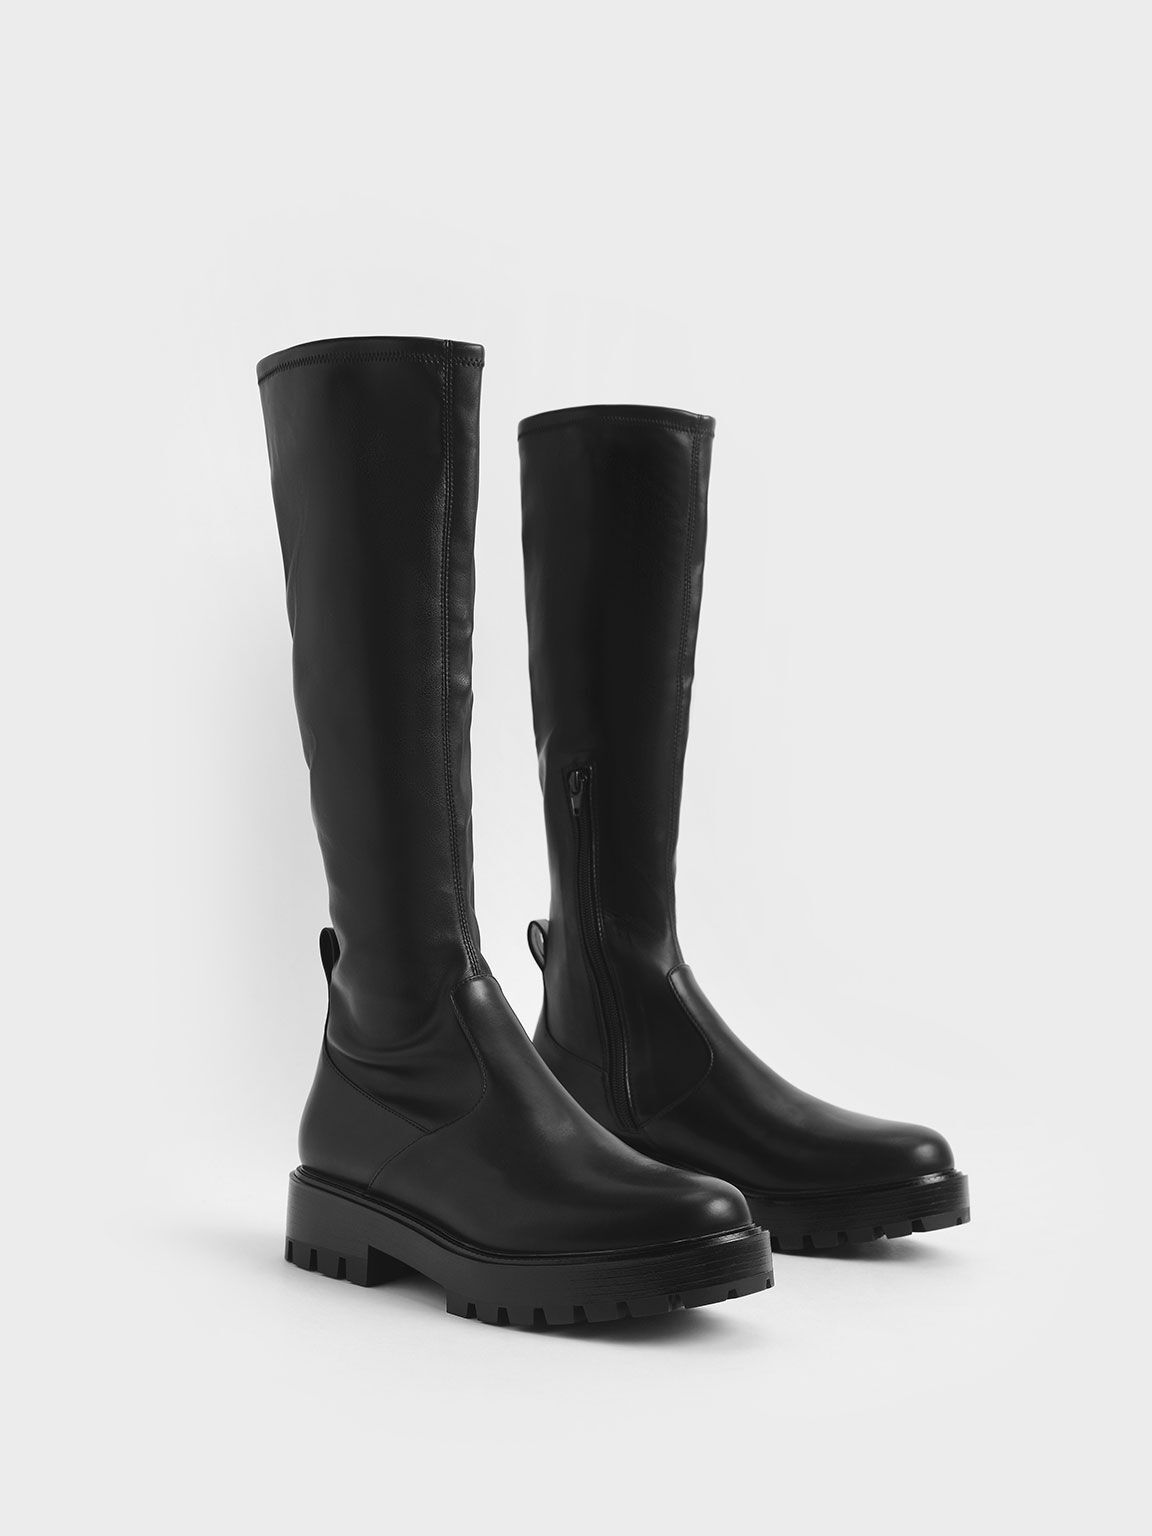 Black Knee-High Boots - CHARLES & KEITH US